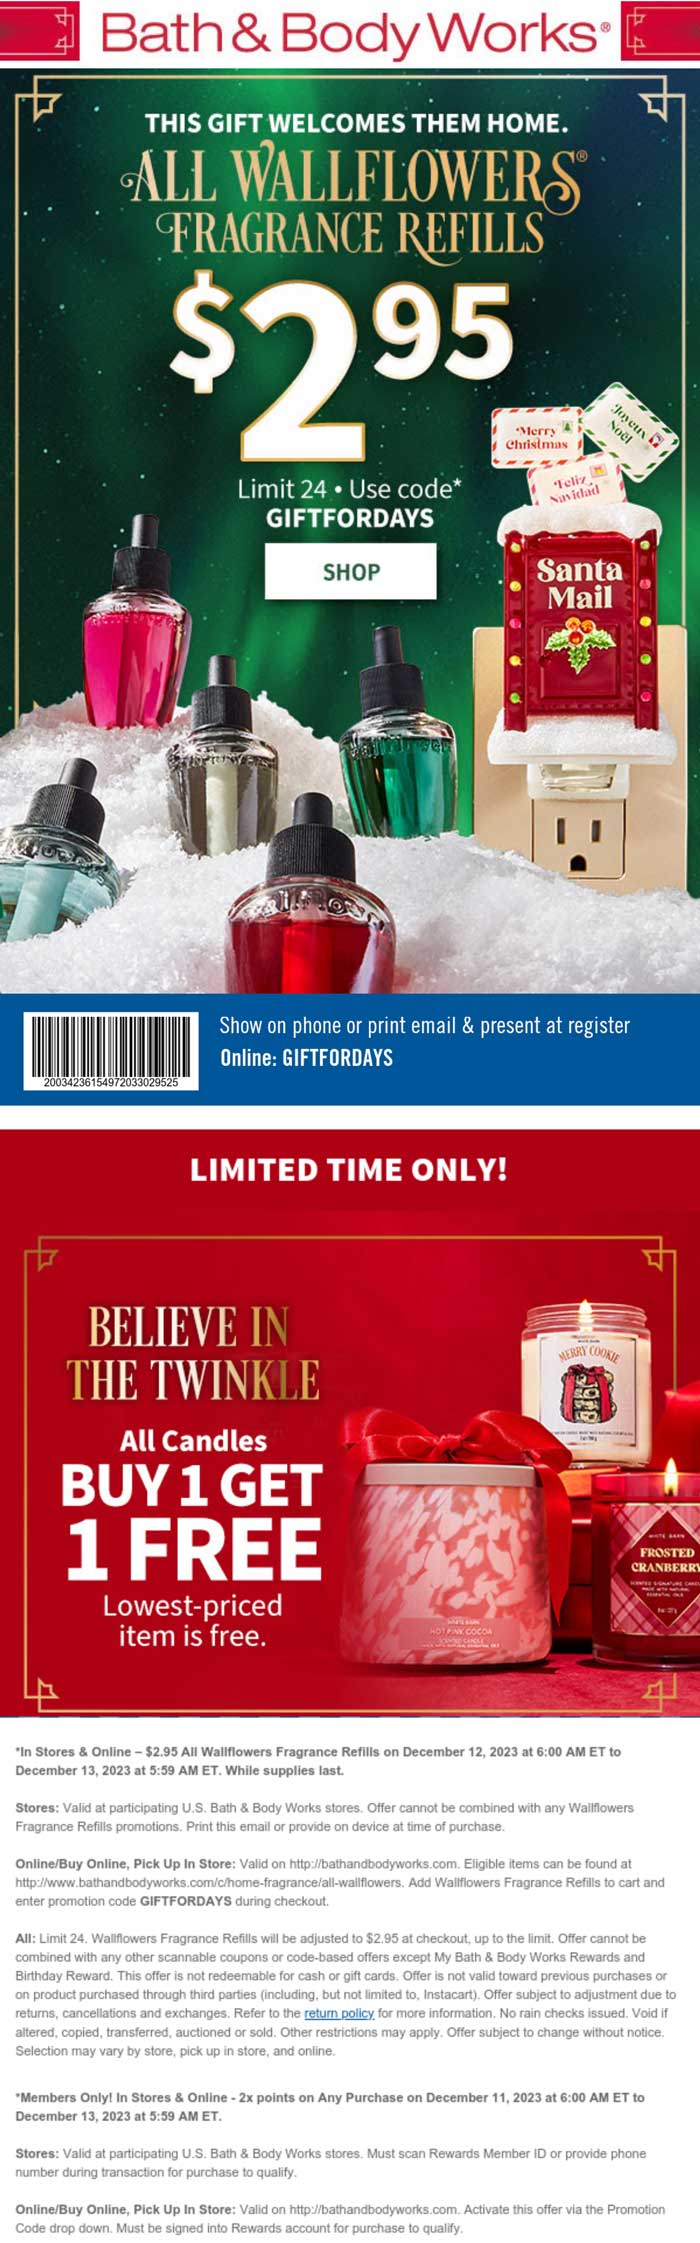 Bath & Body Works stores Coupon  $3 fragrance refills & second candle free today at Bath & Body Works, or online via promo code GIFTFORDAYS #bathbodyworks 